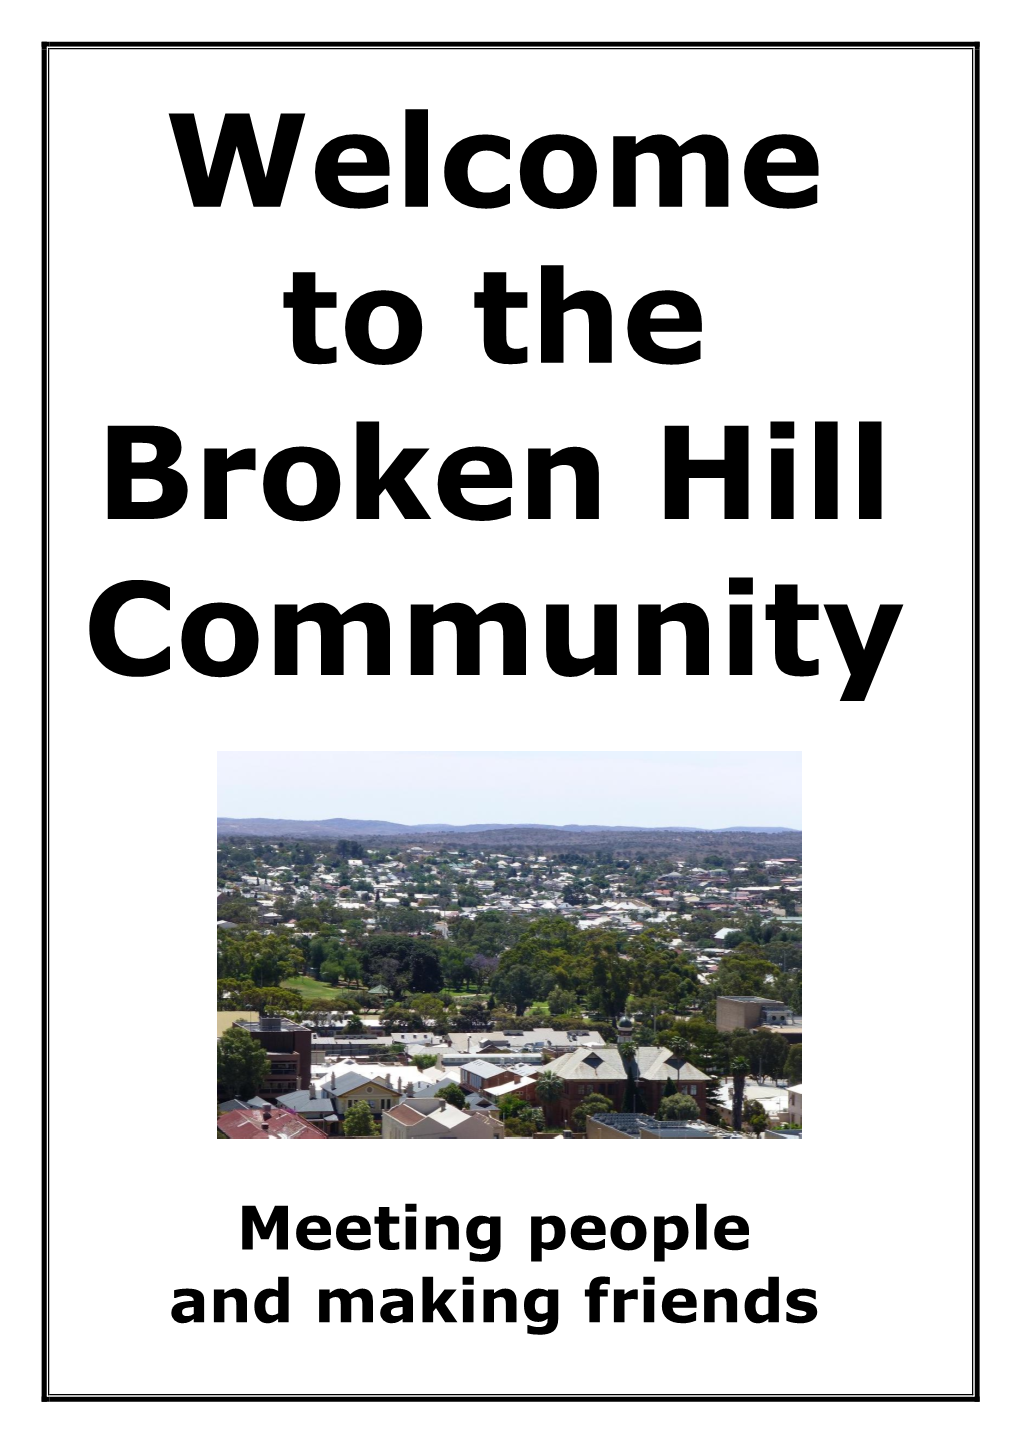 Welcome to the Broken Hill Community